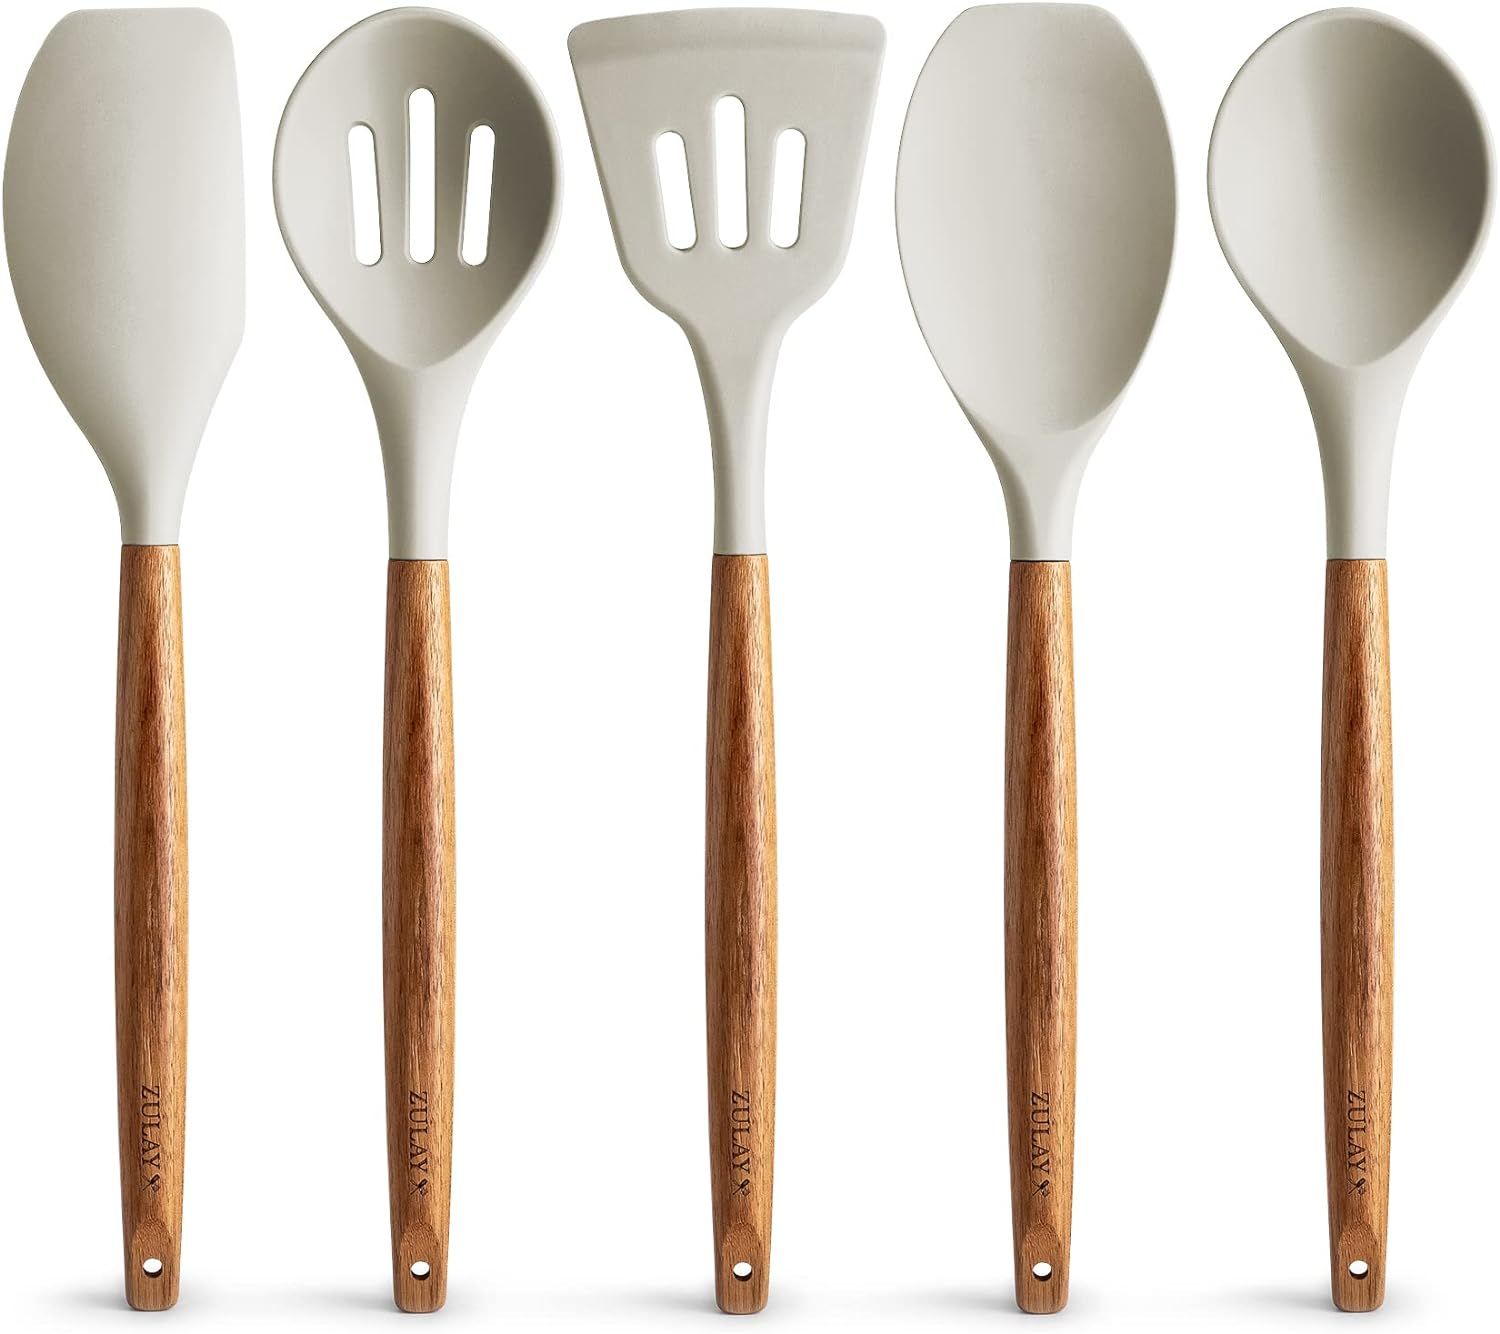 Zulay Non-Stick Silicone Utensils Set with Authentic Acacia Wood Handles - 5 Piece Silicone Cooki... | Amazon (US)